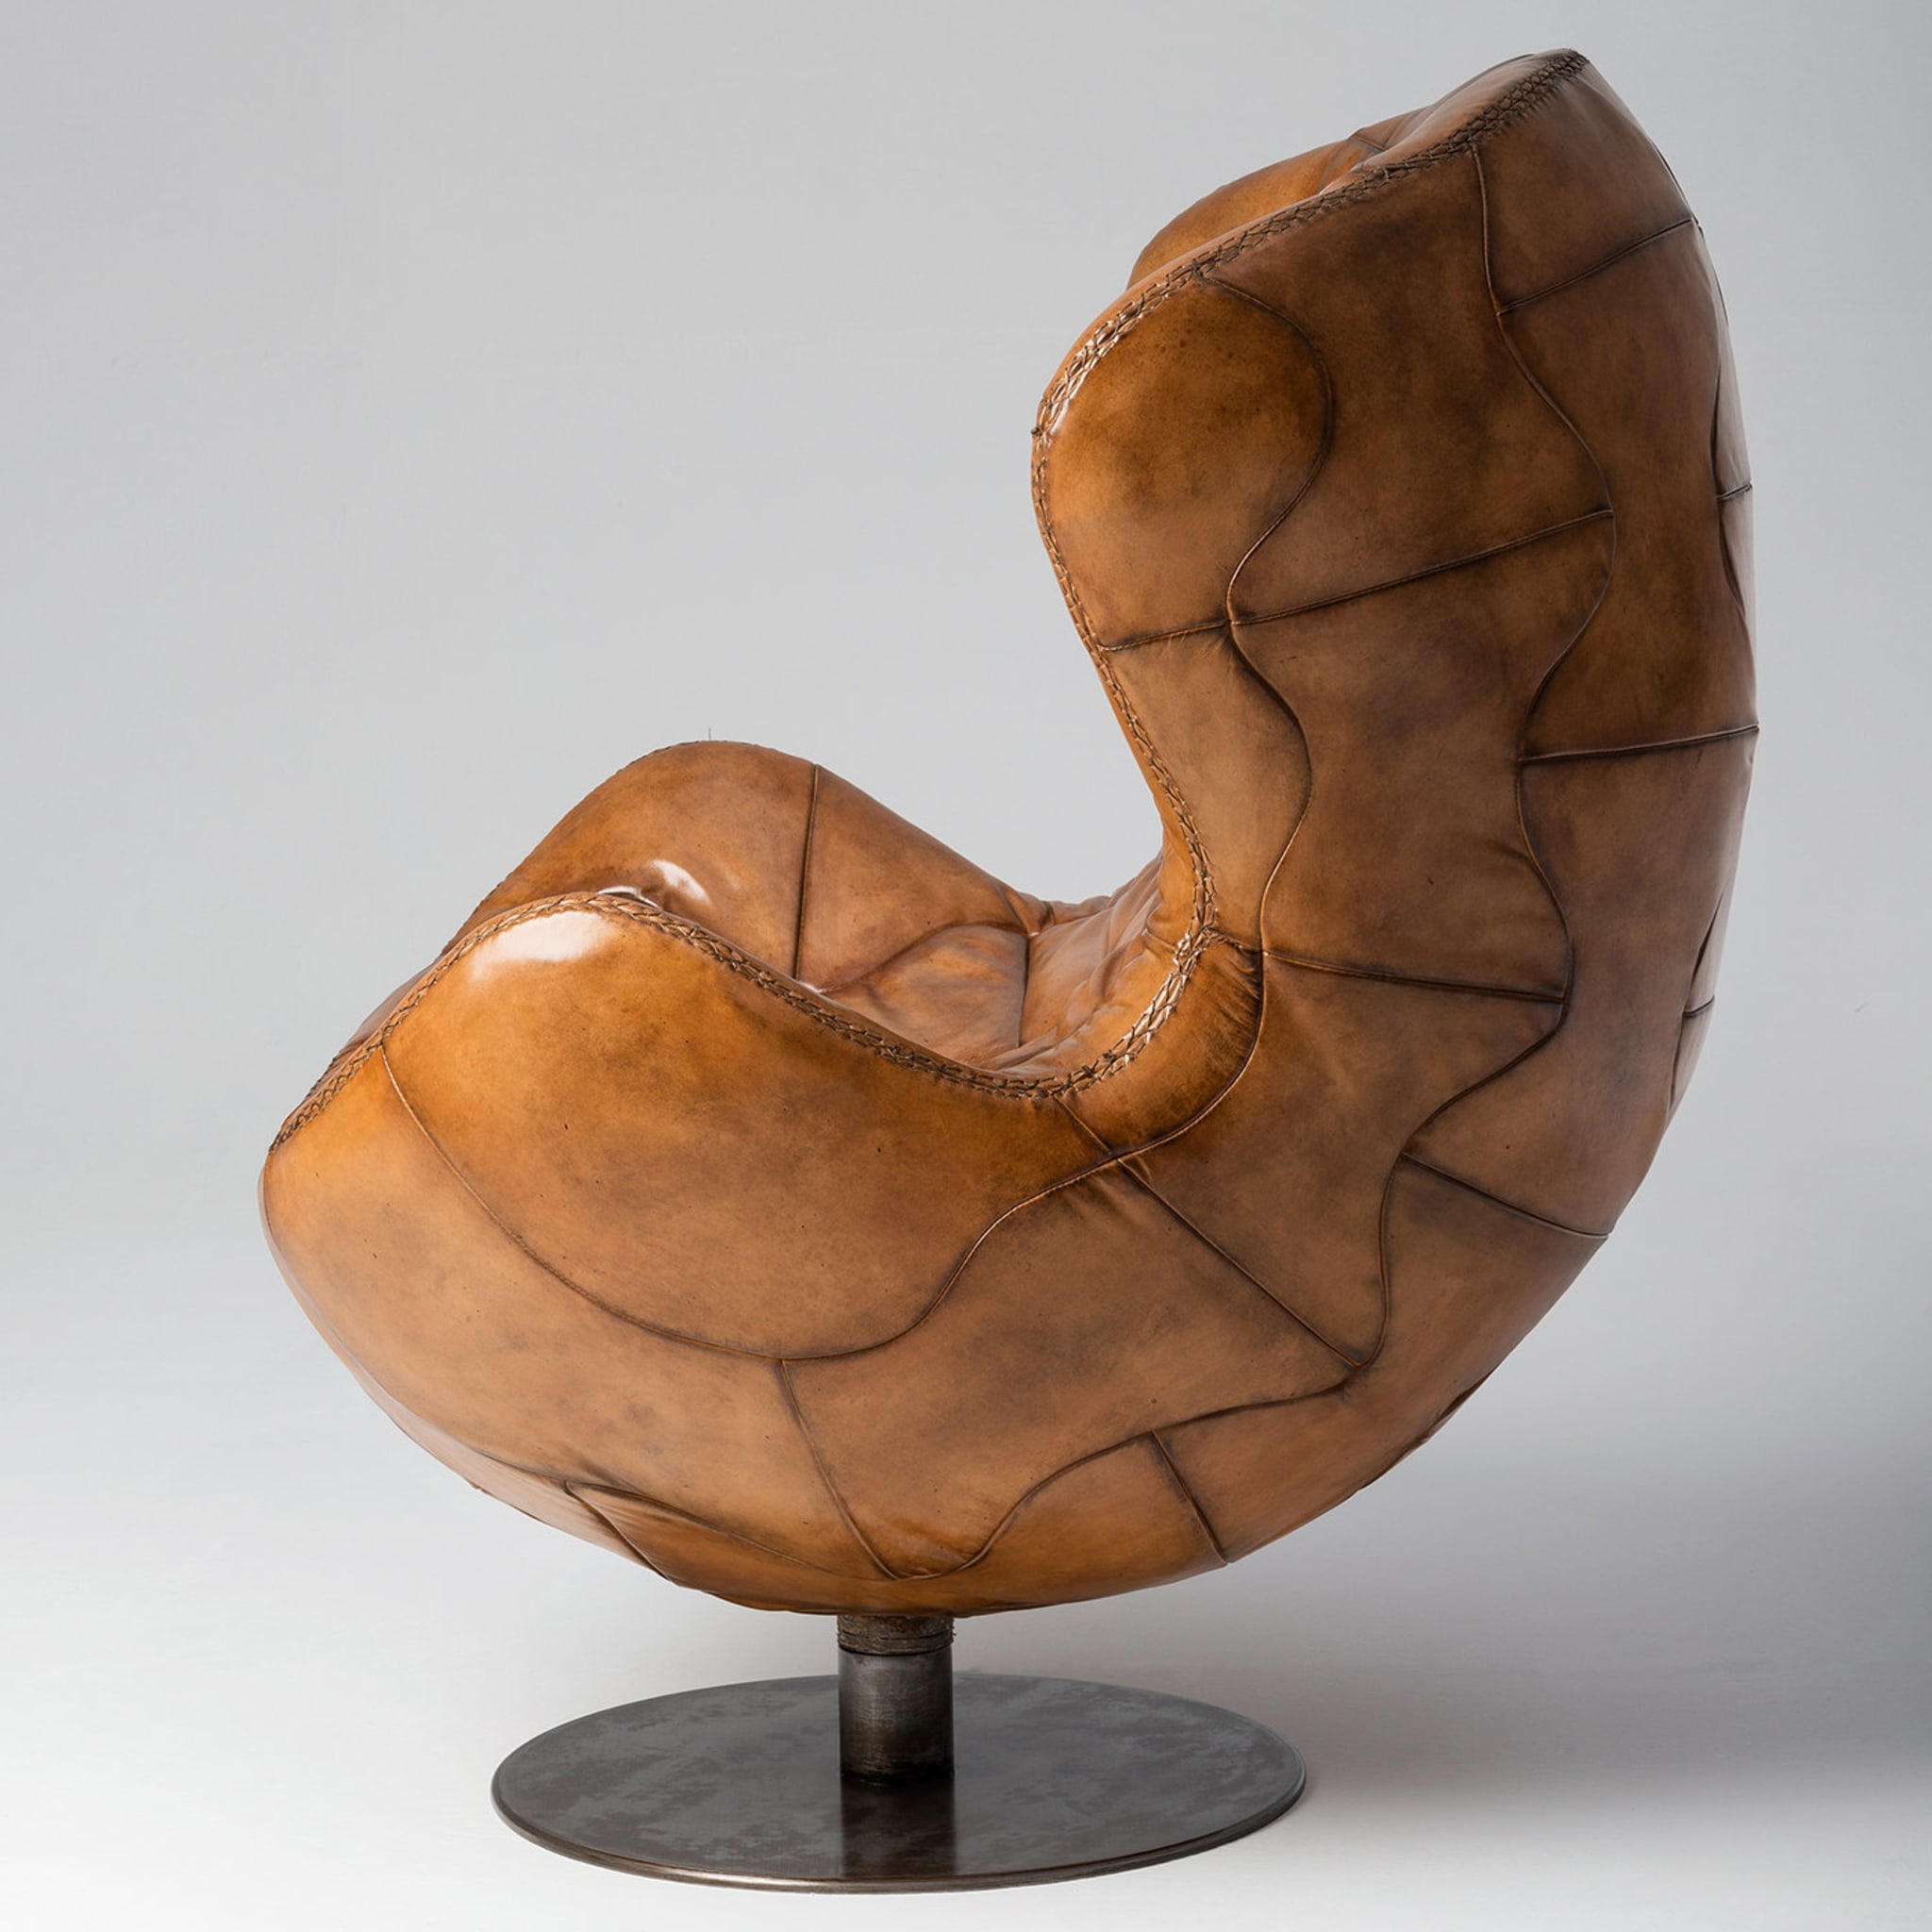 Pelé Armchair Tribeca Collection by Marco and Giulio Mantellassi - Alternative view 1